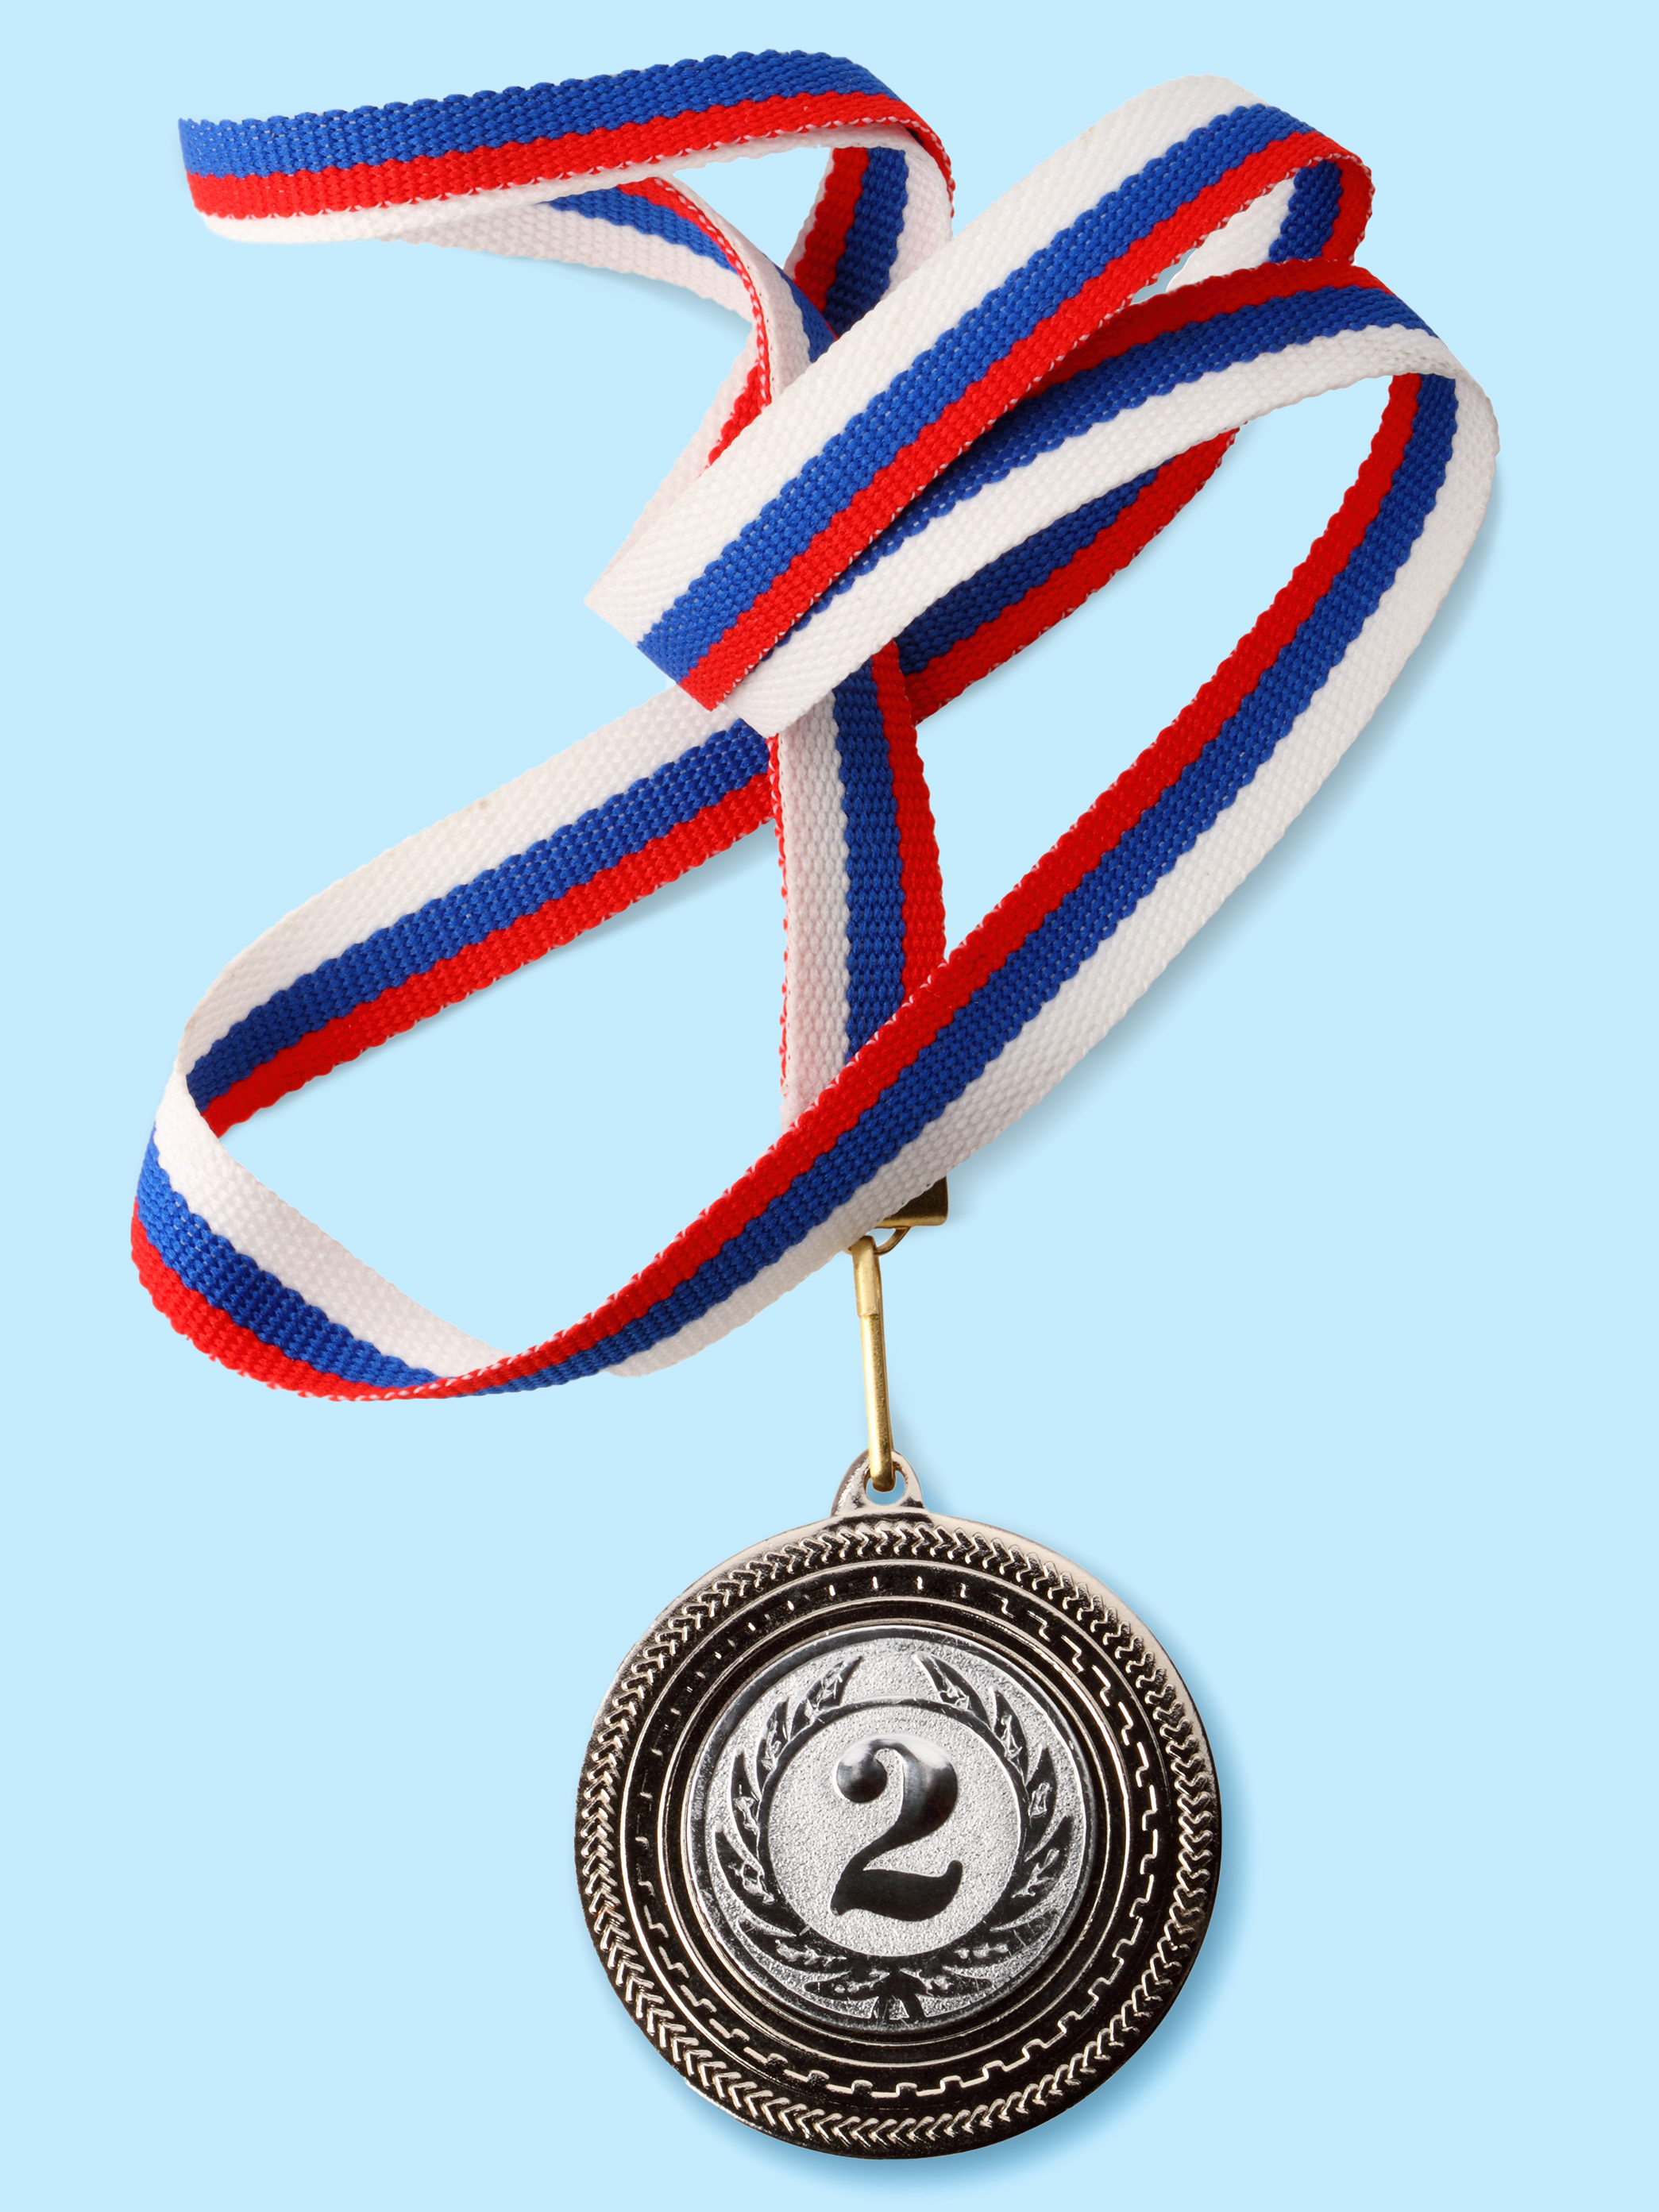 Silver medal with ribbon.